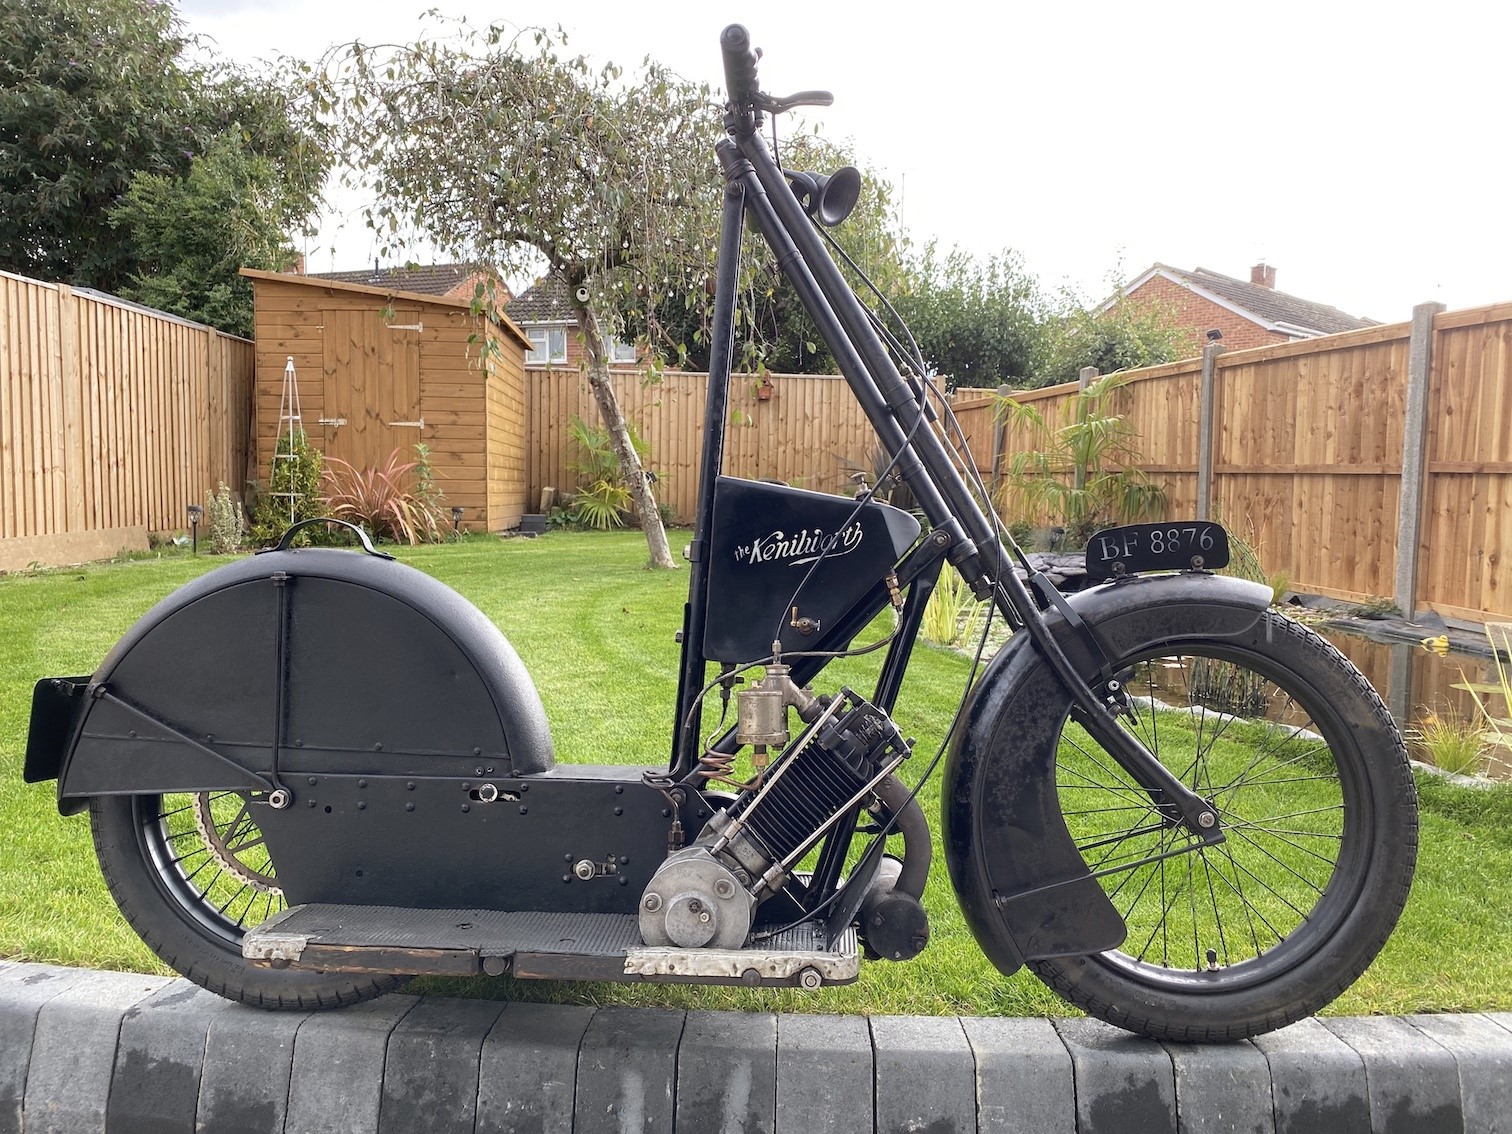 Rare Kenilworth Scooter for sale H&H Classics Auction NMM 27th October